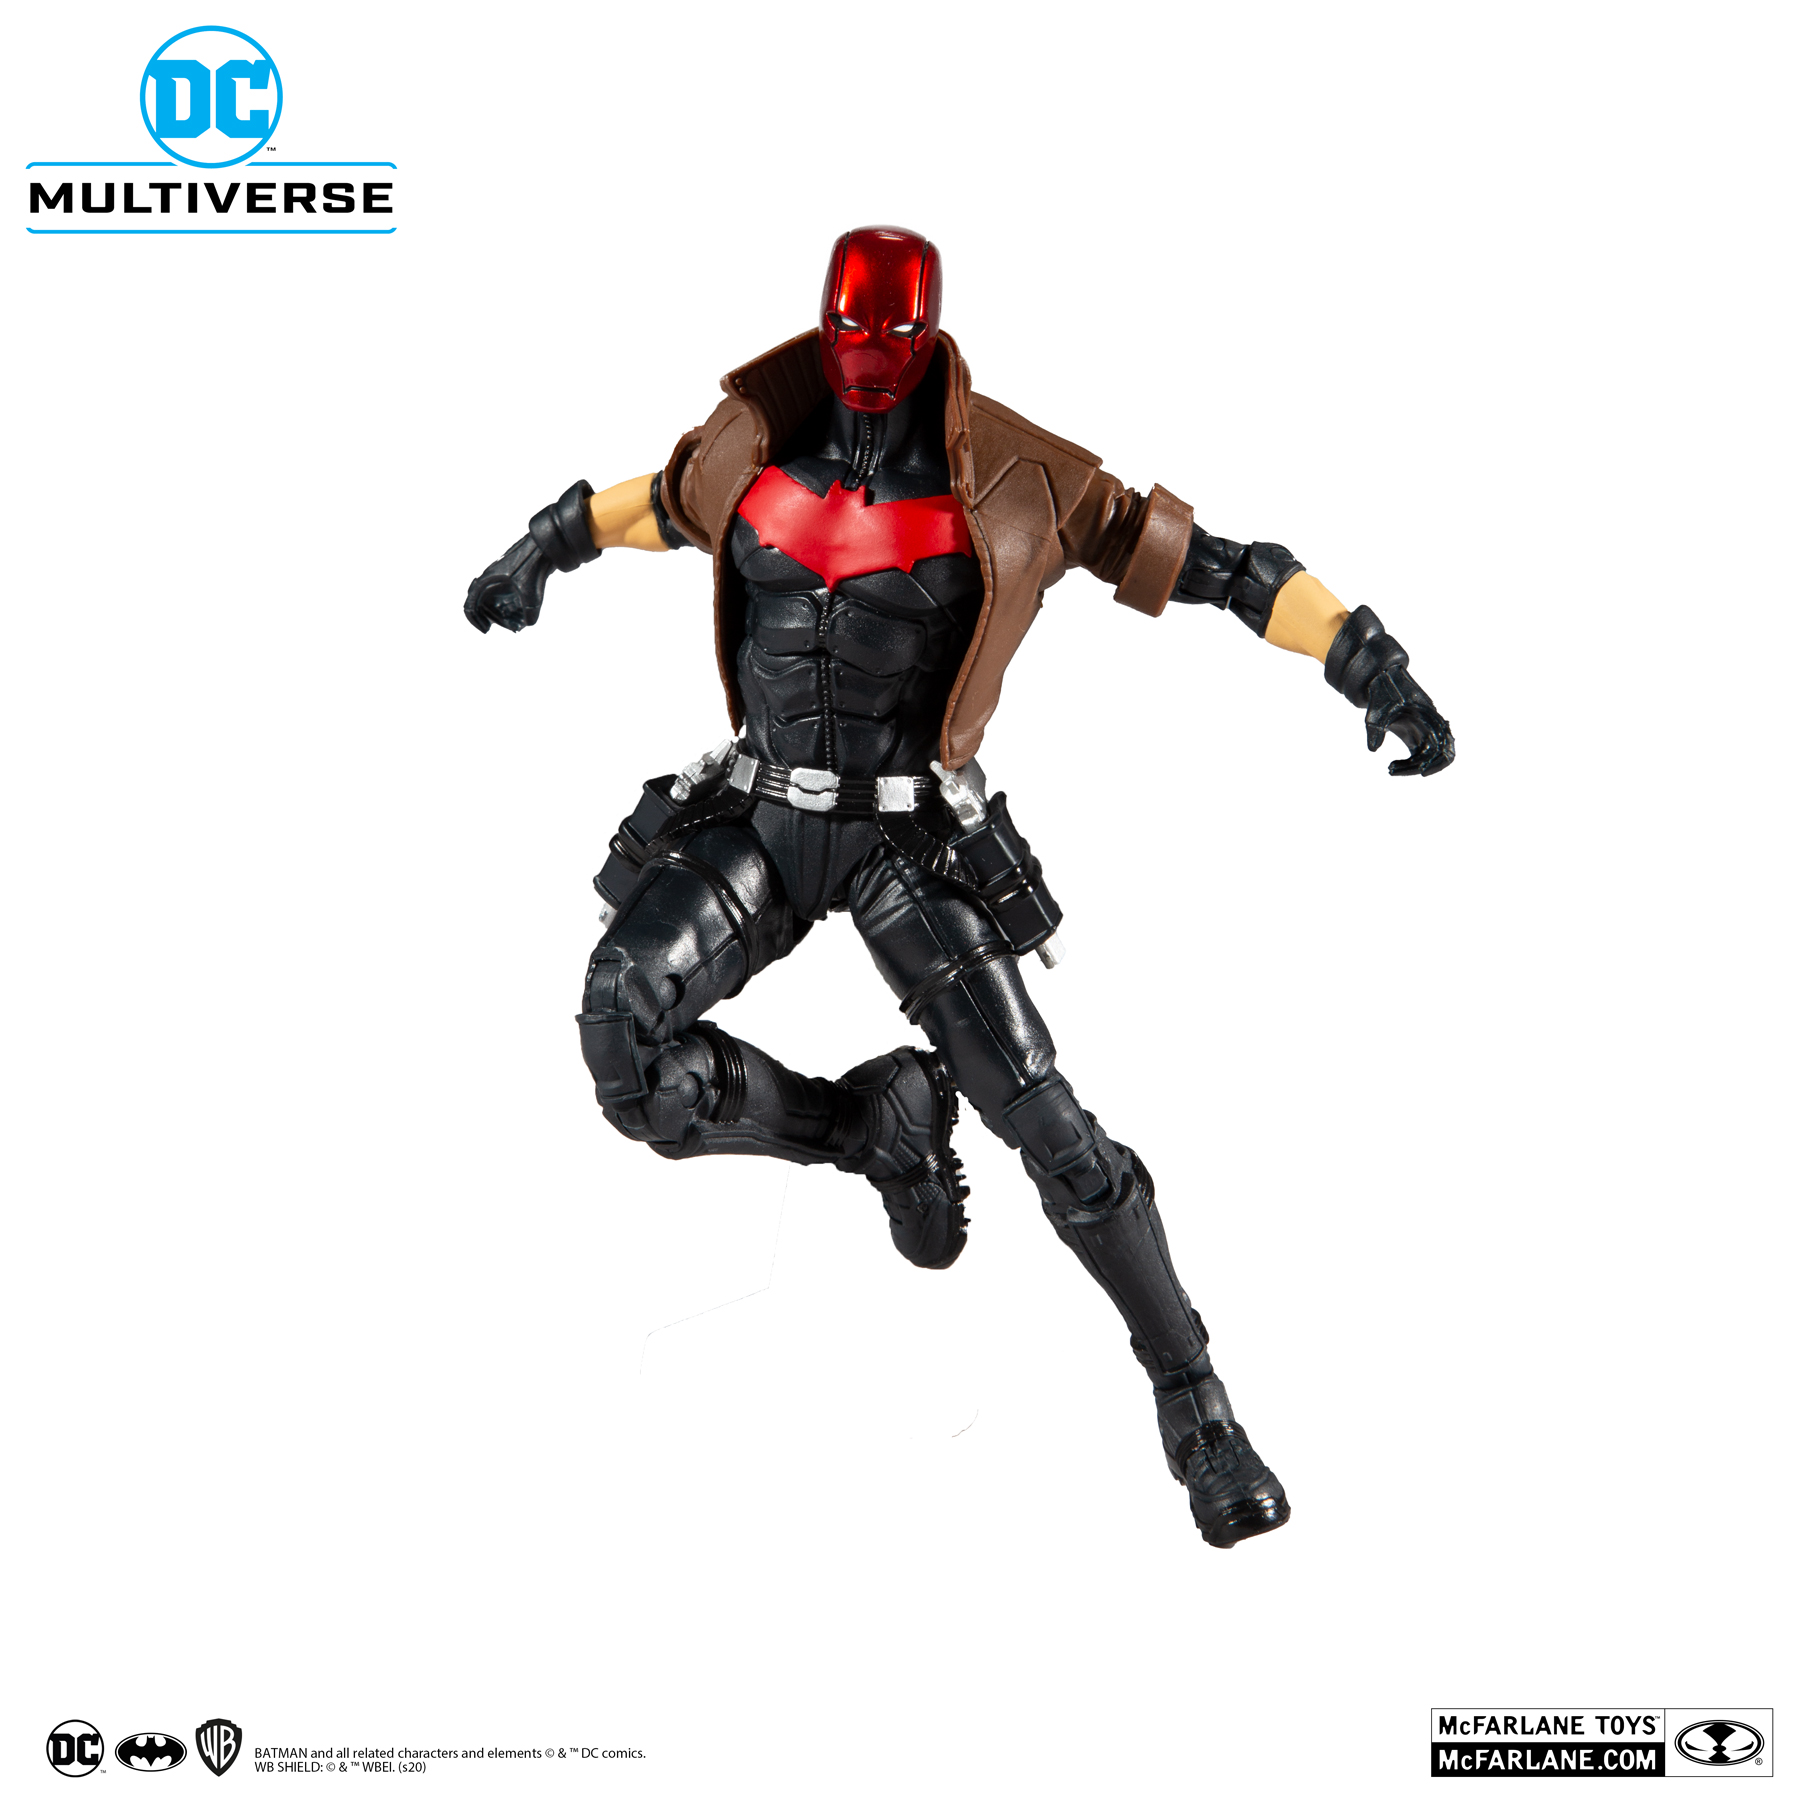 McFarlane Toys DC Multiverse Red Hood 7" Action Figure for sale online 